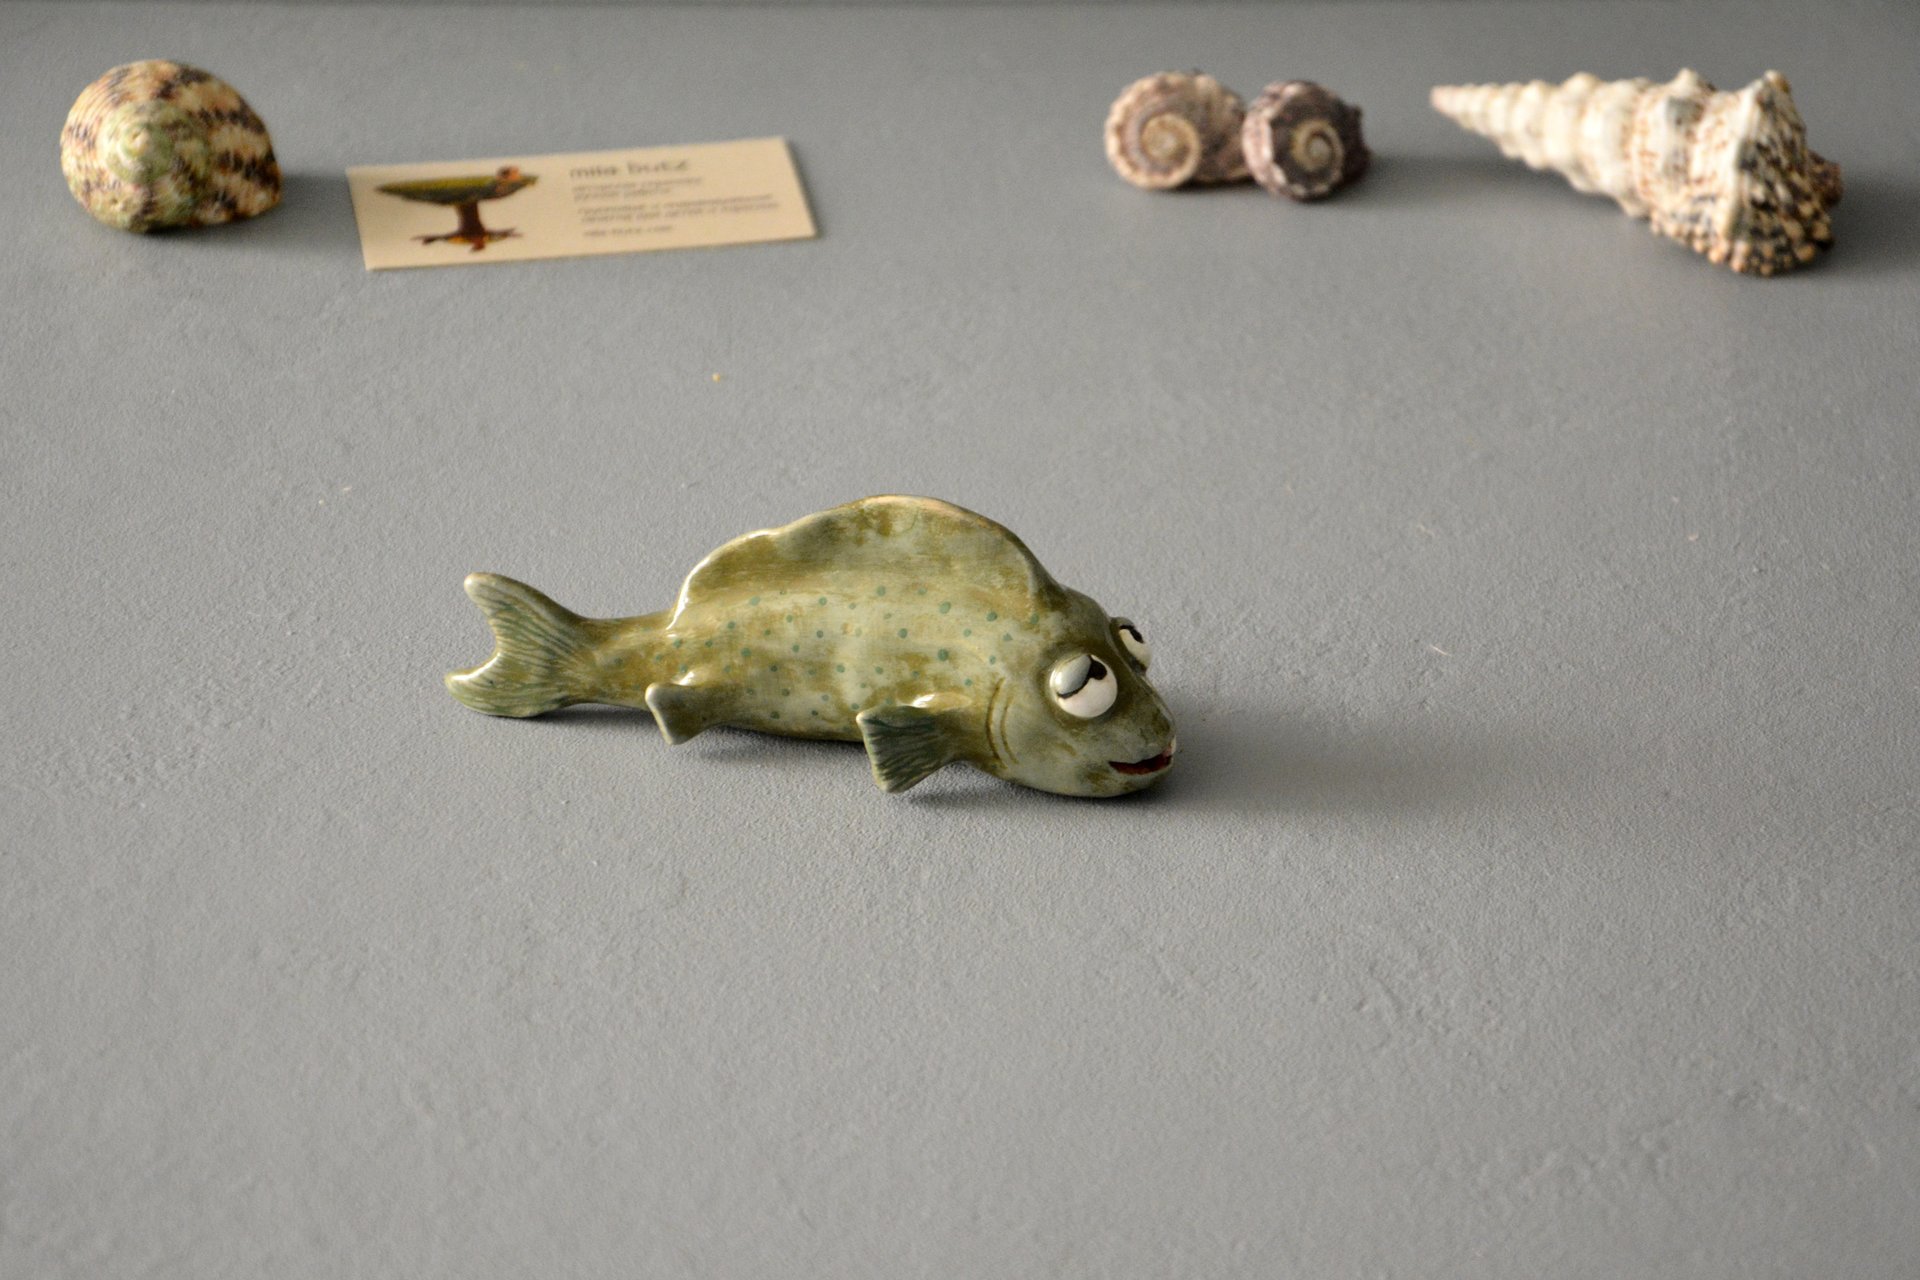 Ceramic figurine of a fish of the Tooth, height - 5 cm, length - 14, width - 5 cm., photo 5 of 7.